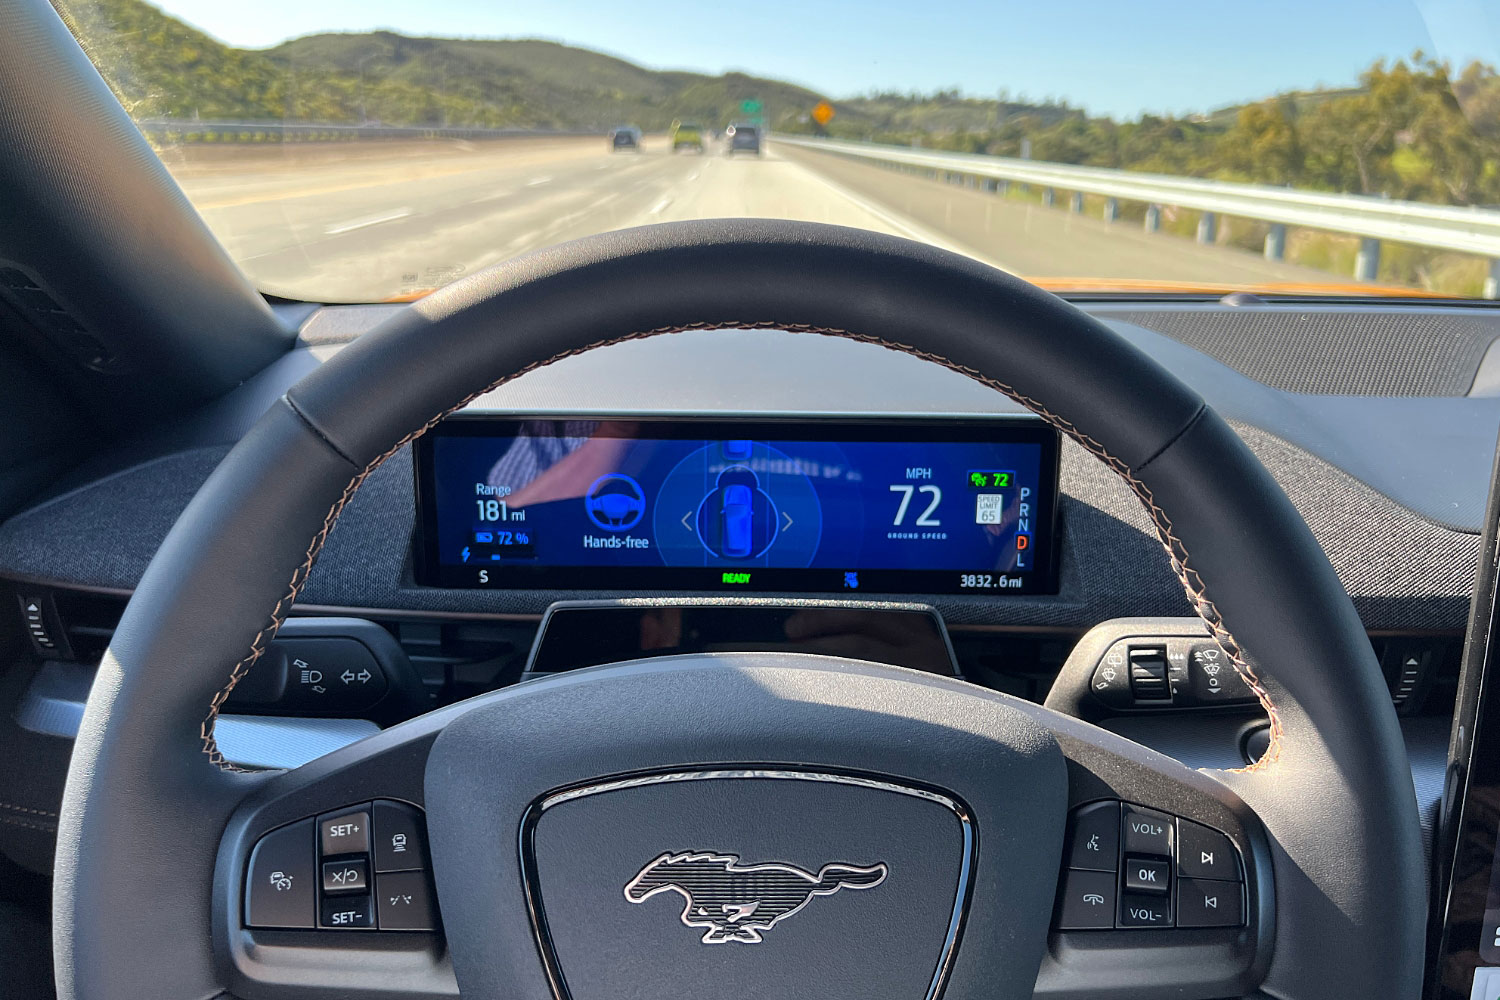 2023 Ford Mustang Mach-E GT BlueCruise in hands-free driving mode